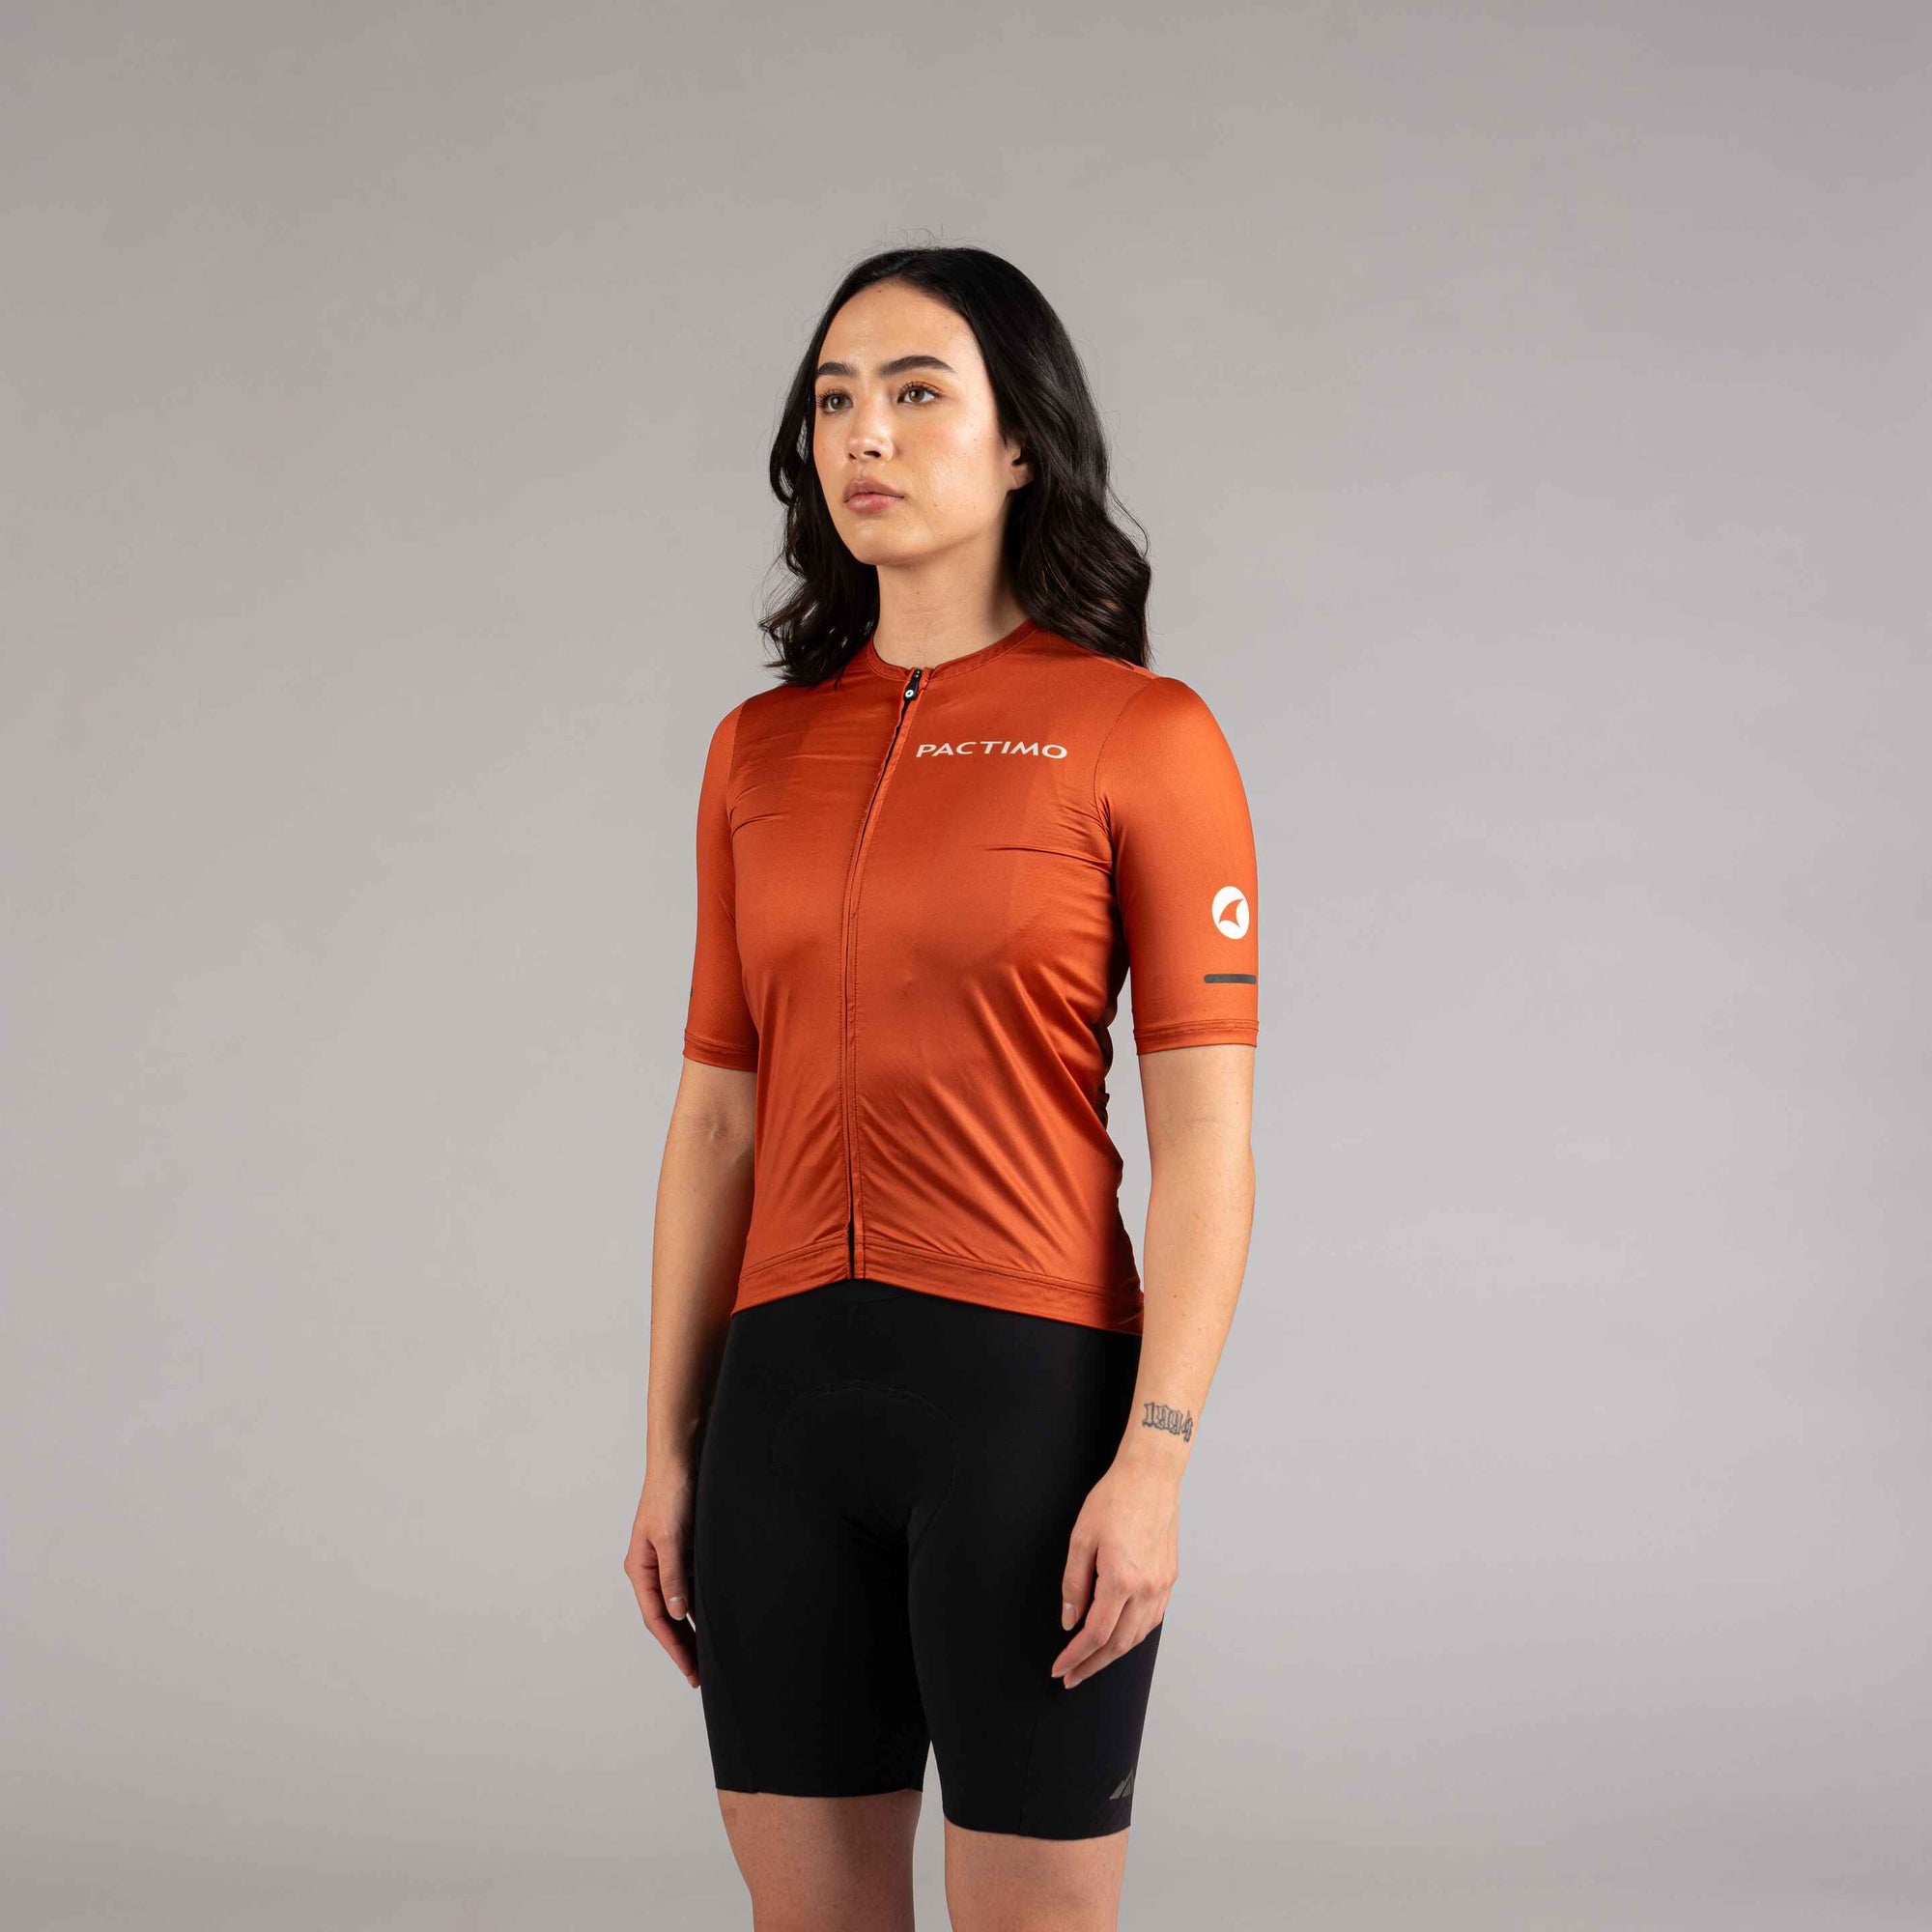 Women's Summit Cycling Jersey - Comparison Page